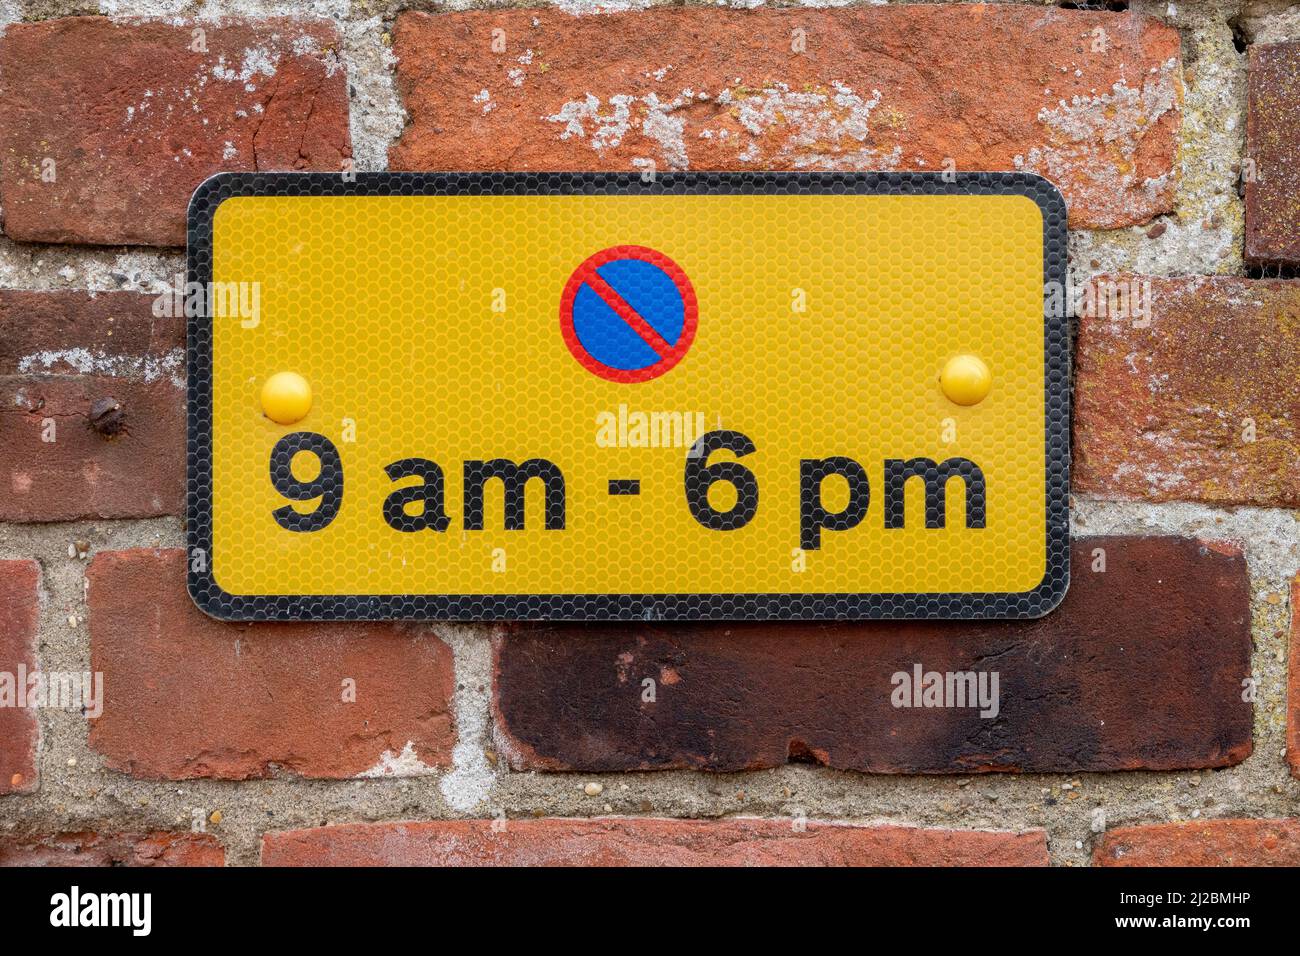 Small rectangular parking restriction sign black on yellow with red and blue symbol for the hours of 9am to 6pm mounted on a red brick wall Stock Photo